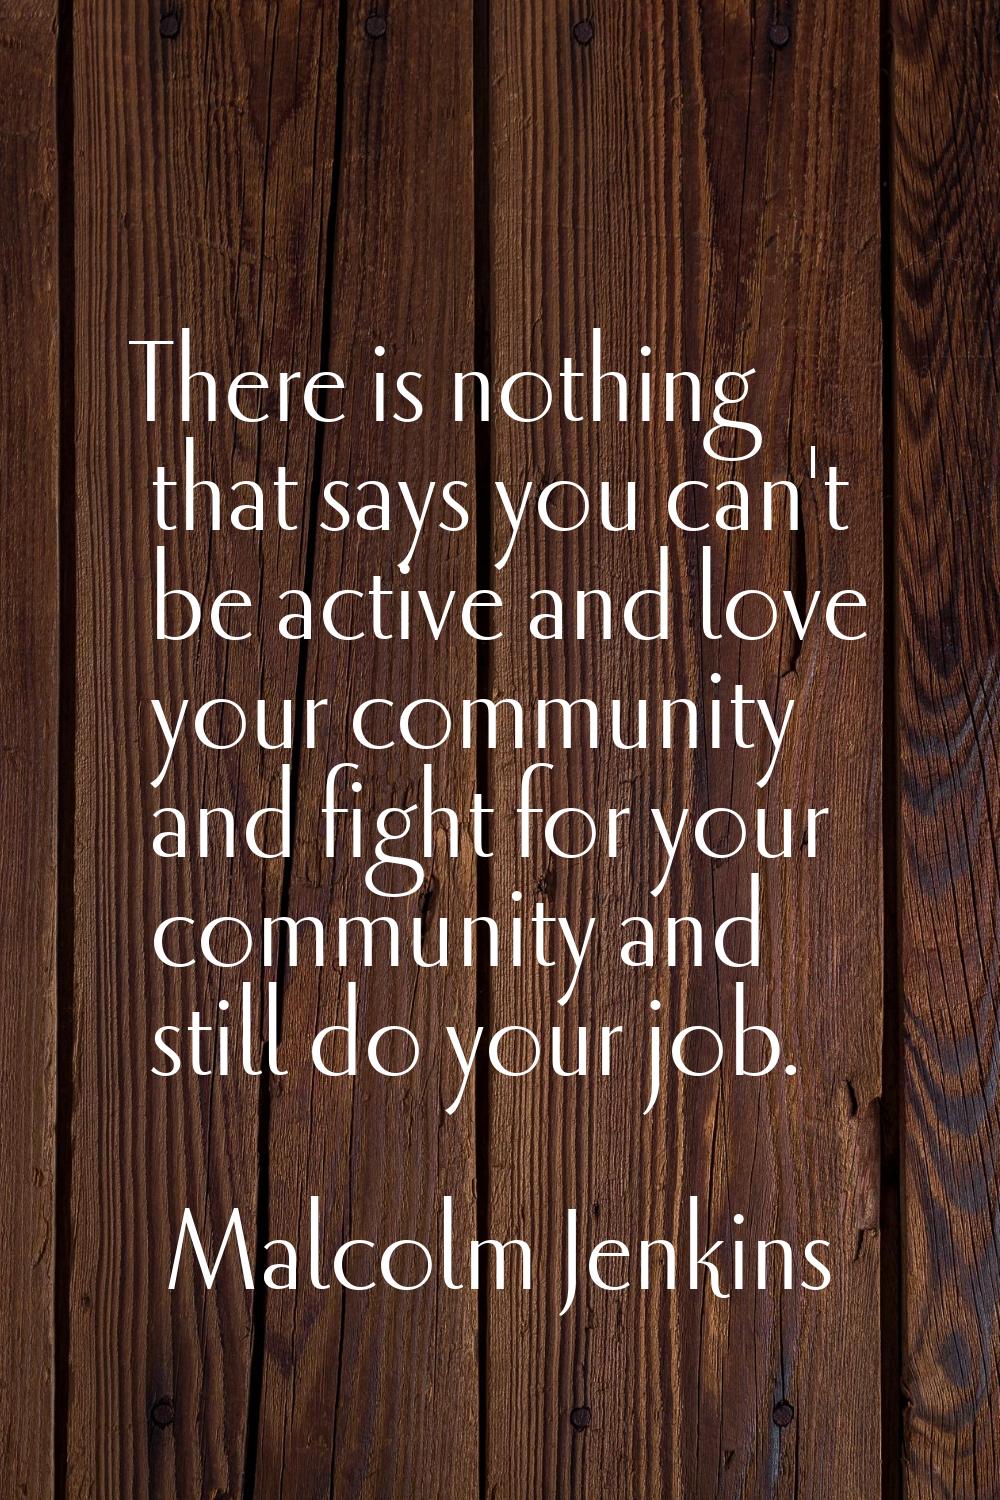 There is nothing that says you can't be active and love your community and fight for your community